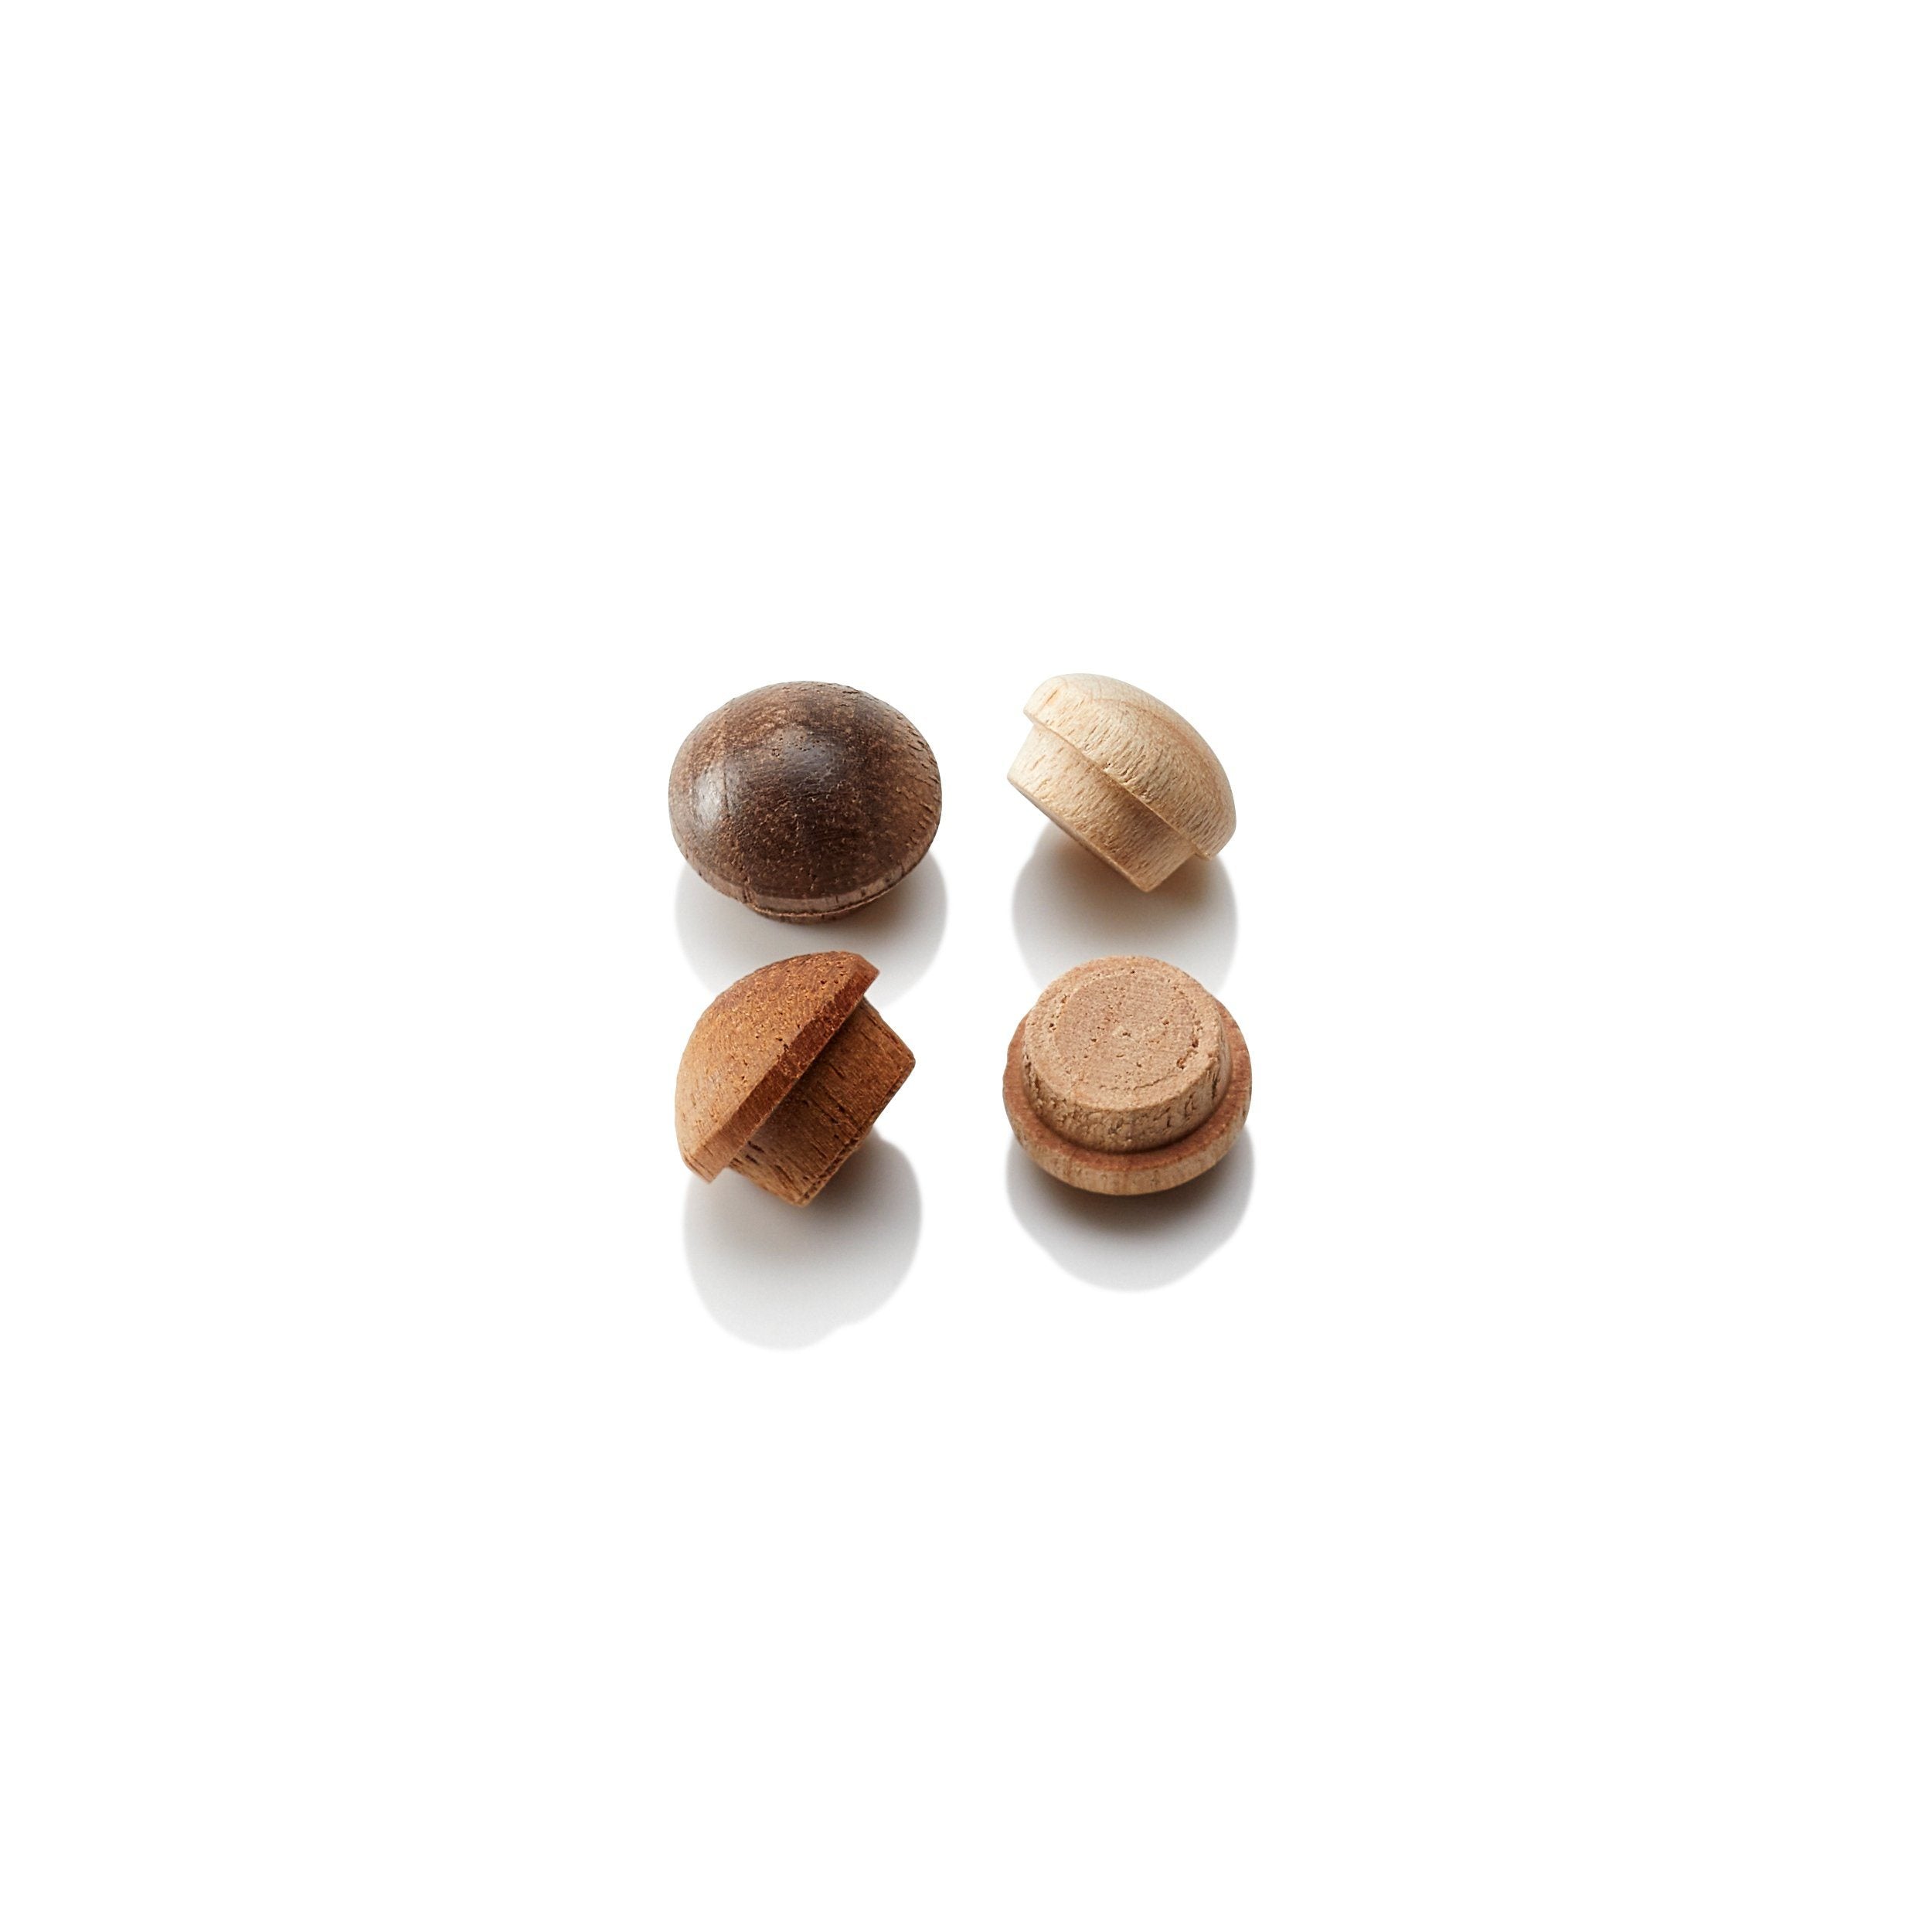 5/16" Button Top Wood Plugs